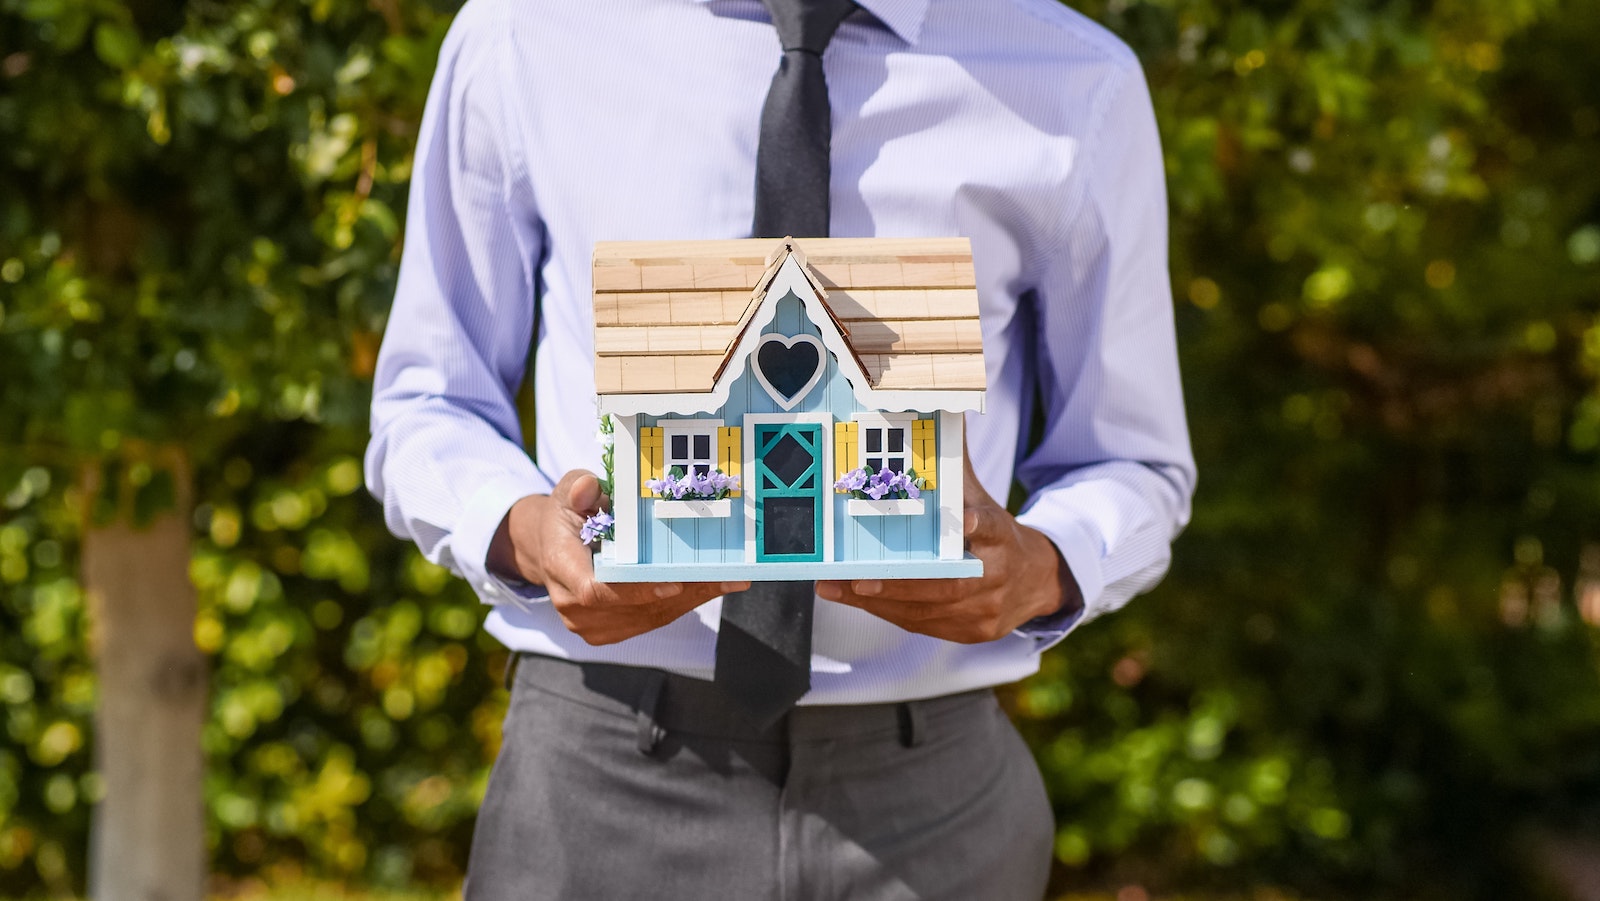 Person in a suit holding a miniature house against a background of trees